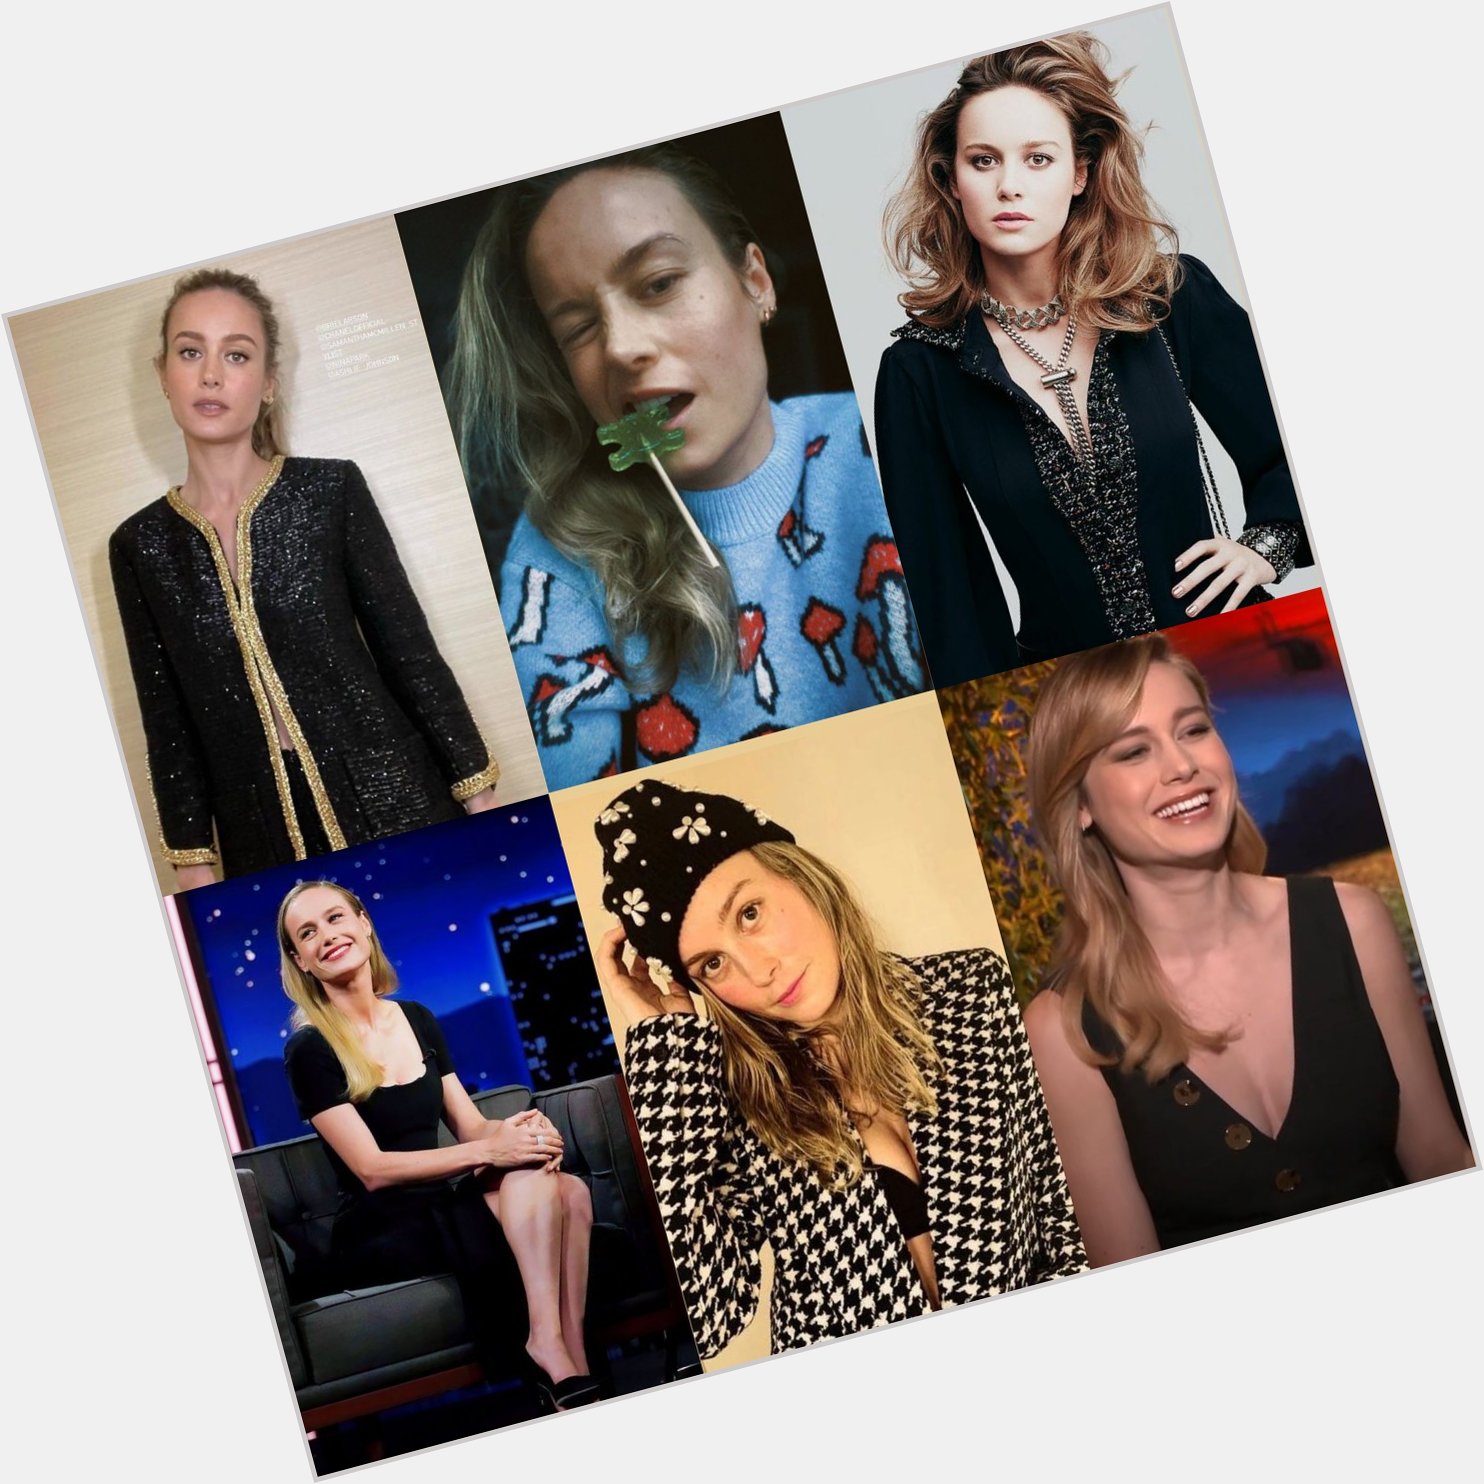 Happy birthday to my most beloved brie larson! forever our captain marvel 